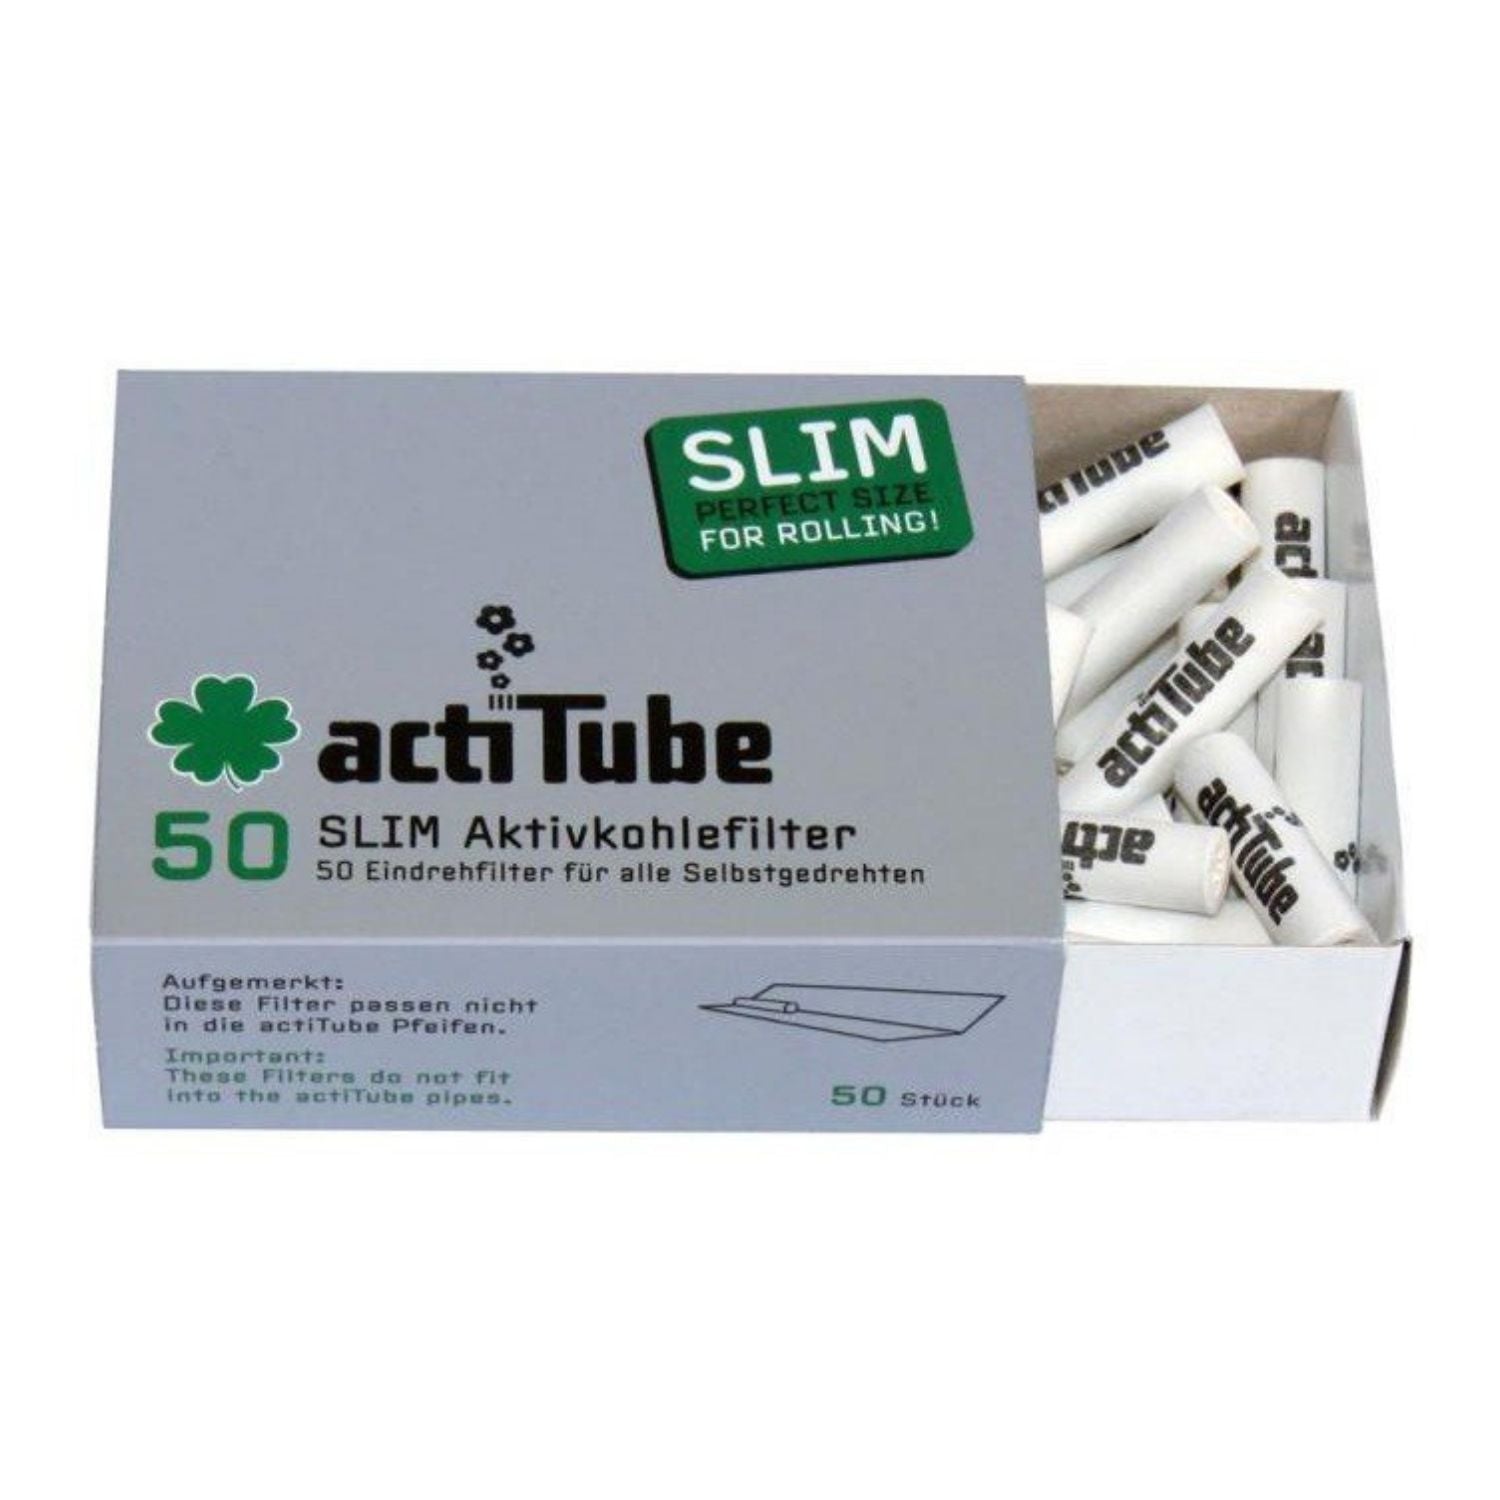  actiTube - Activated Charcoal Filters for Rolling 8,4mm - 1 Box  = 100 Filters : Health & Household